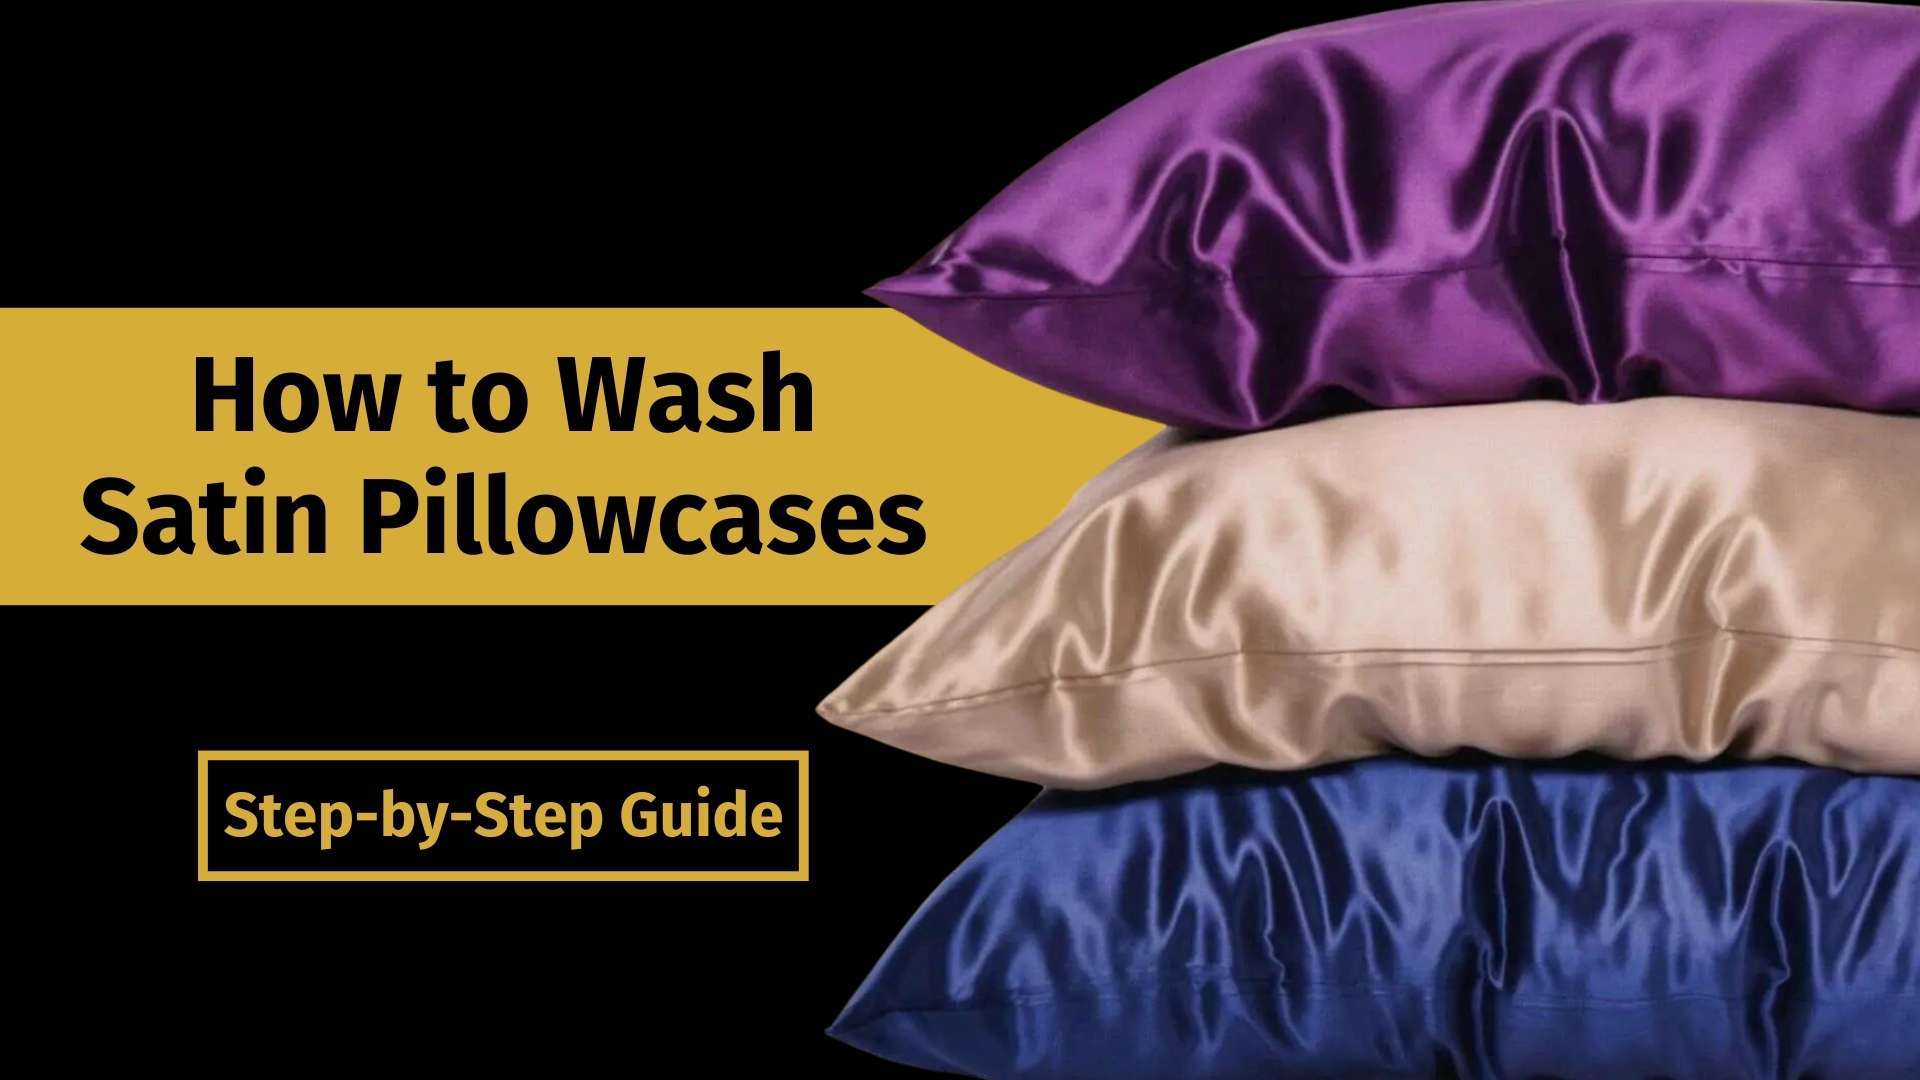 how to wash satin pillowcases banner image with a picture of 3 satin pillowcases stacked on top of each other